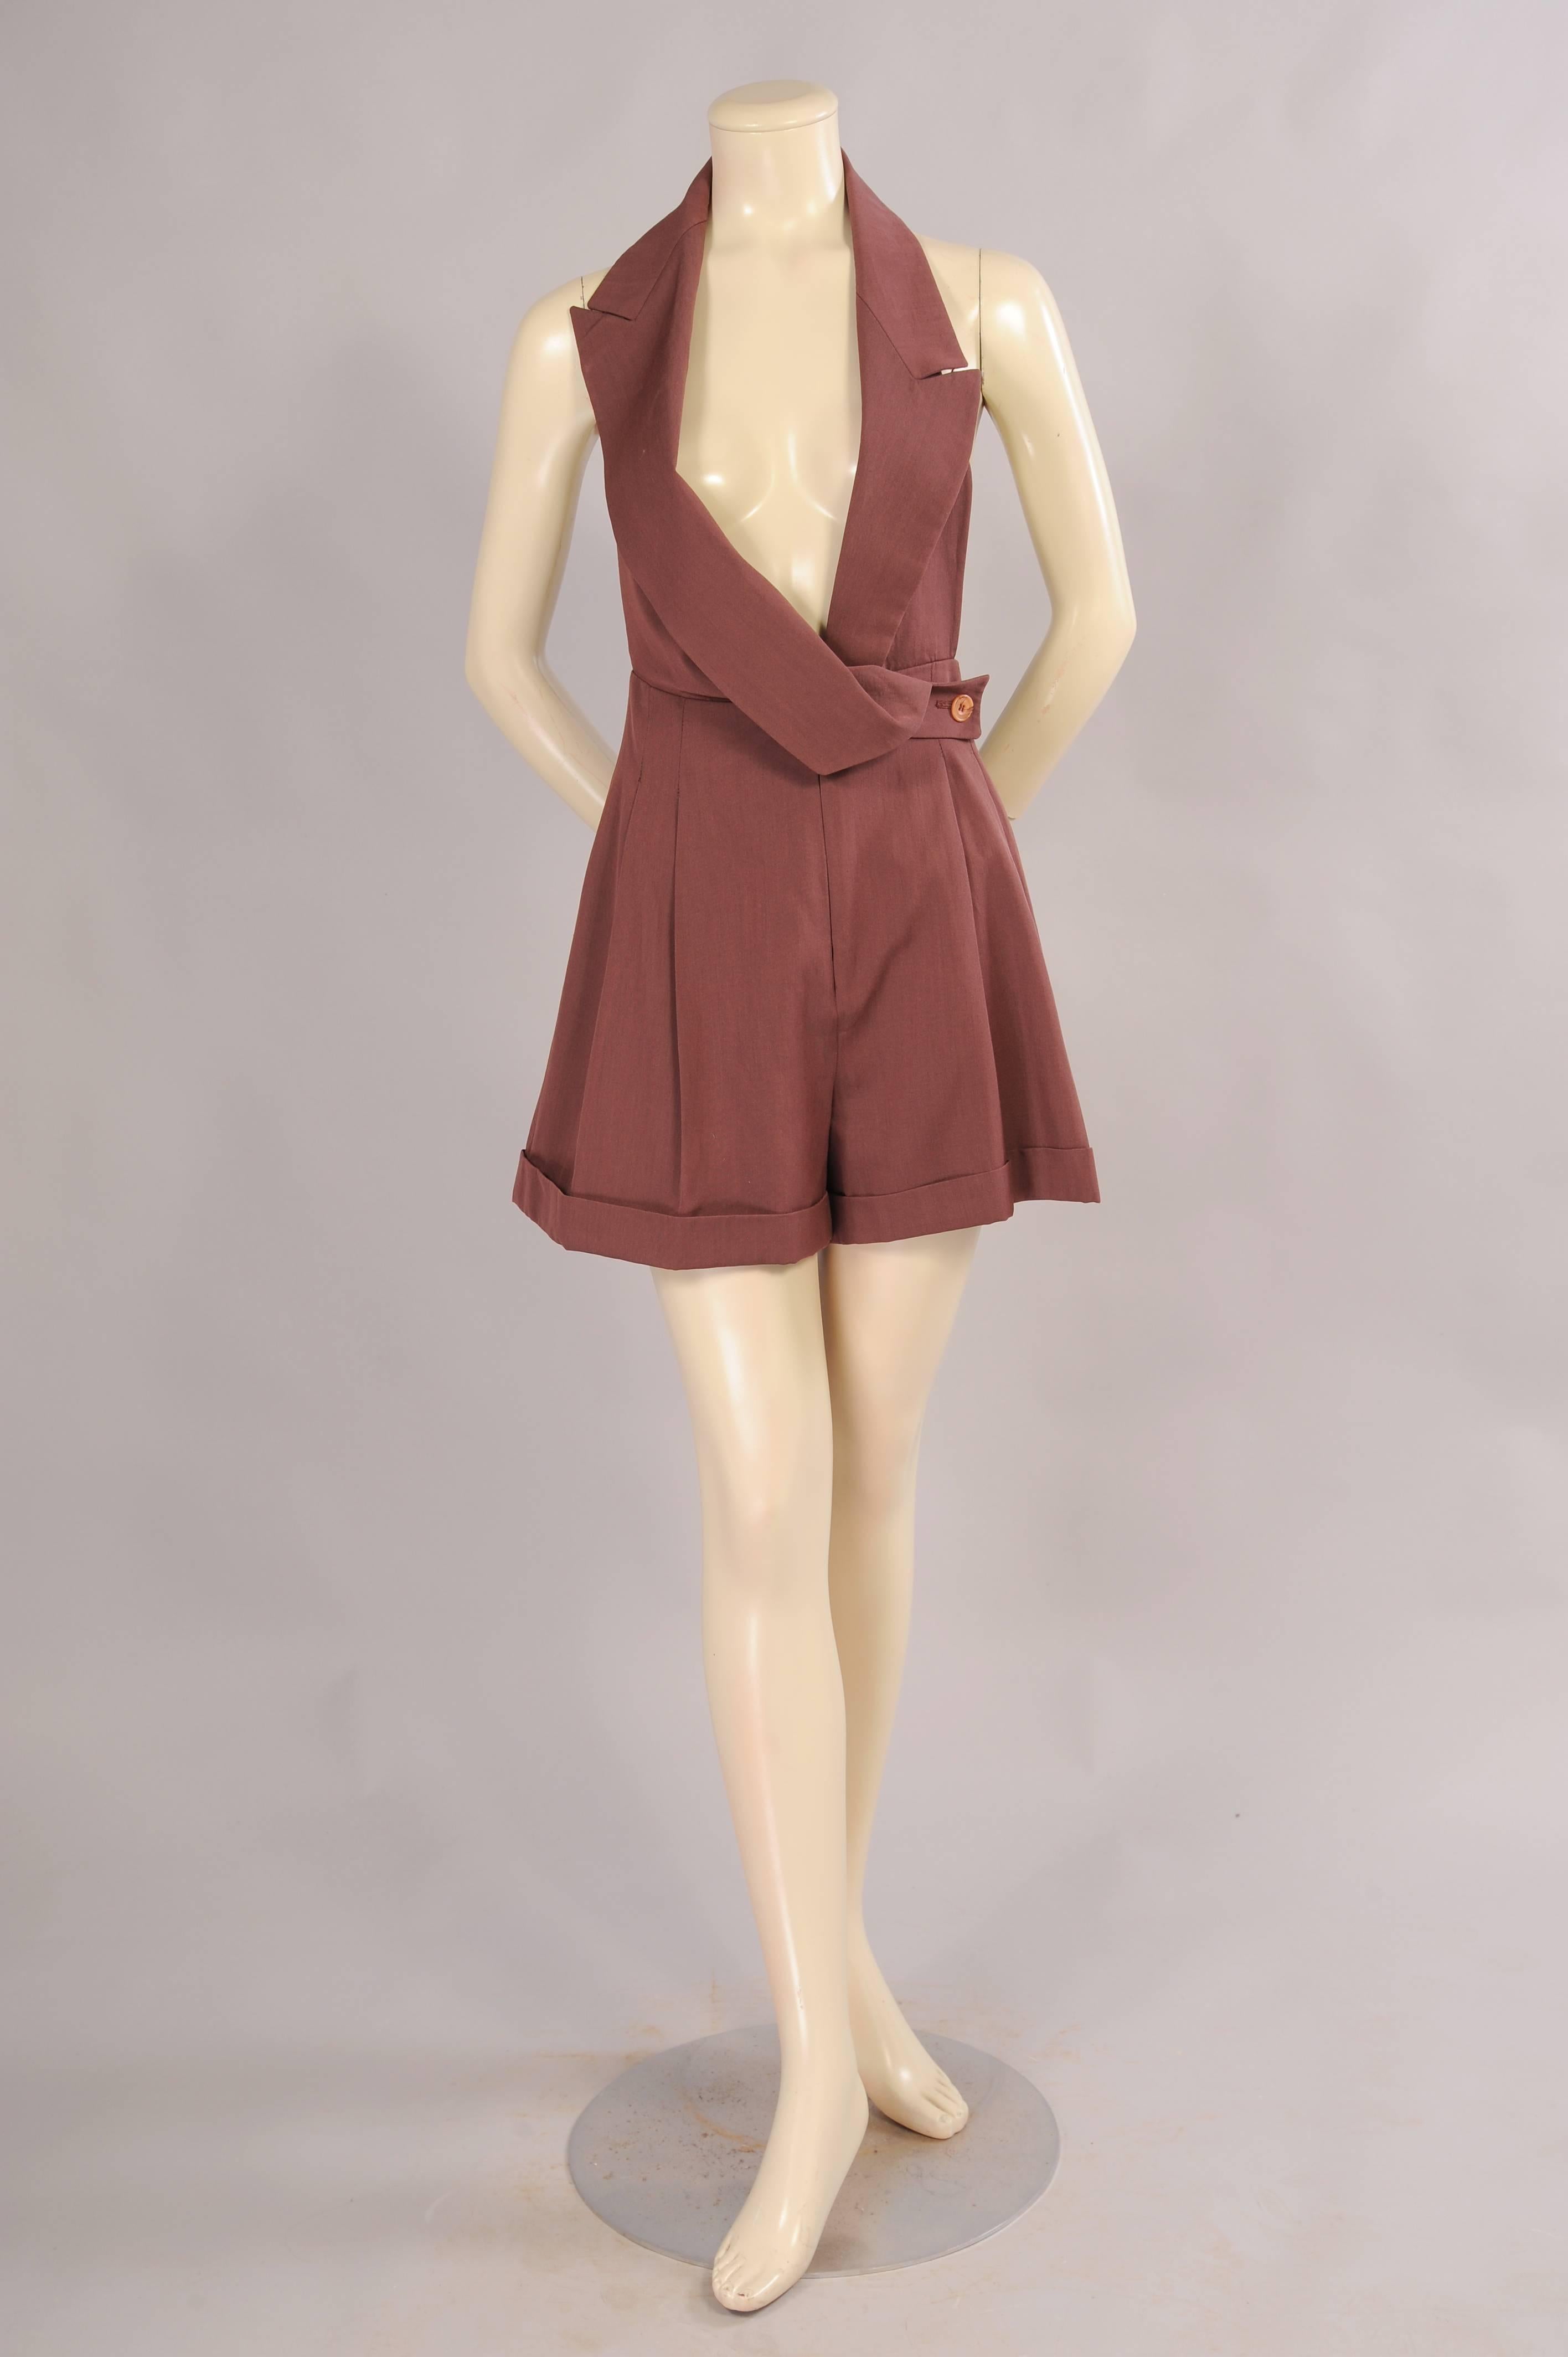 A cocoa brown wool and cotton blend is used for this "formal" shorts outfit with off center notched lapels. The lapel notch sits high on the right shoulder and drapes across to button on the left side. There is an invisible zipper at the